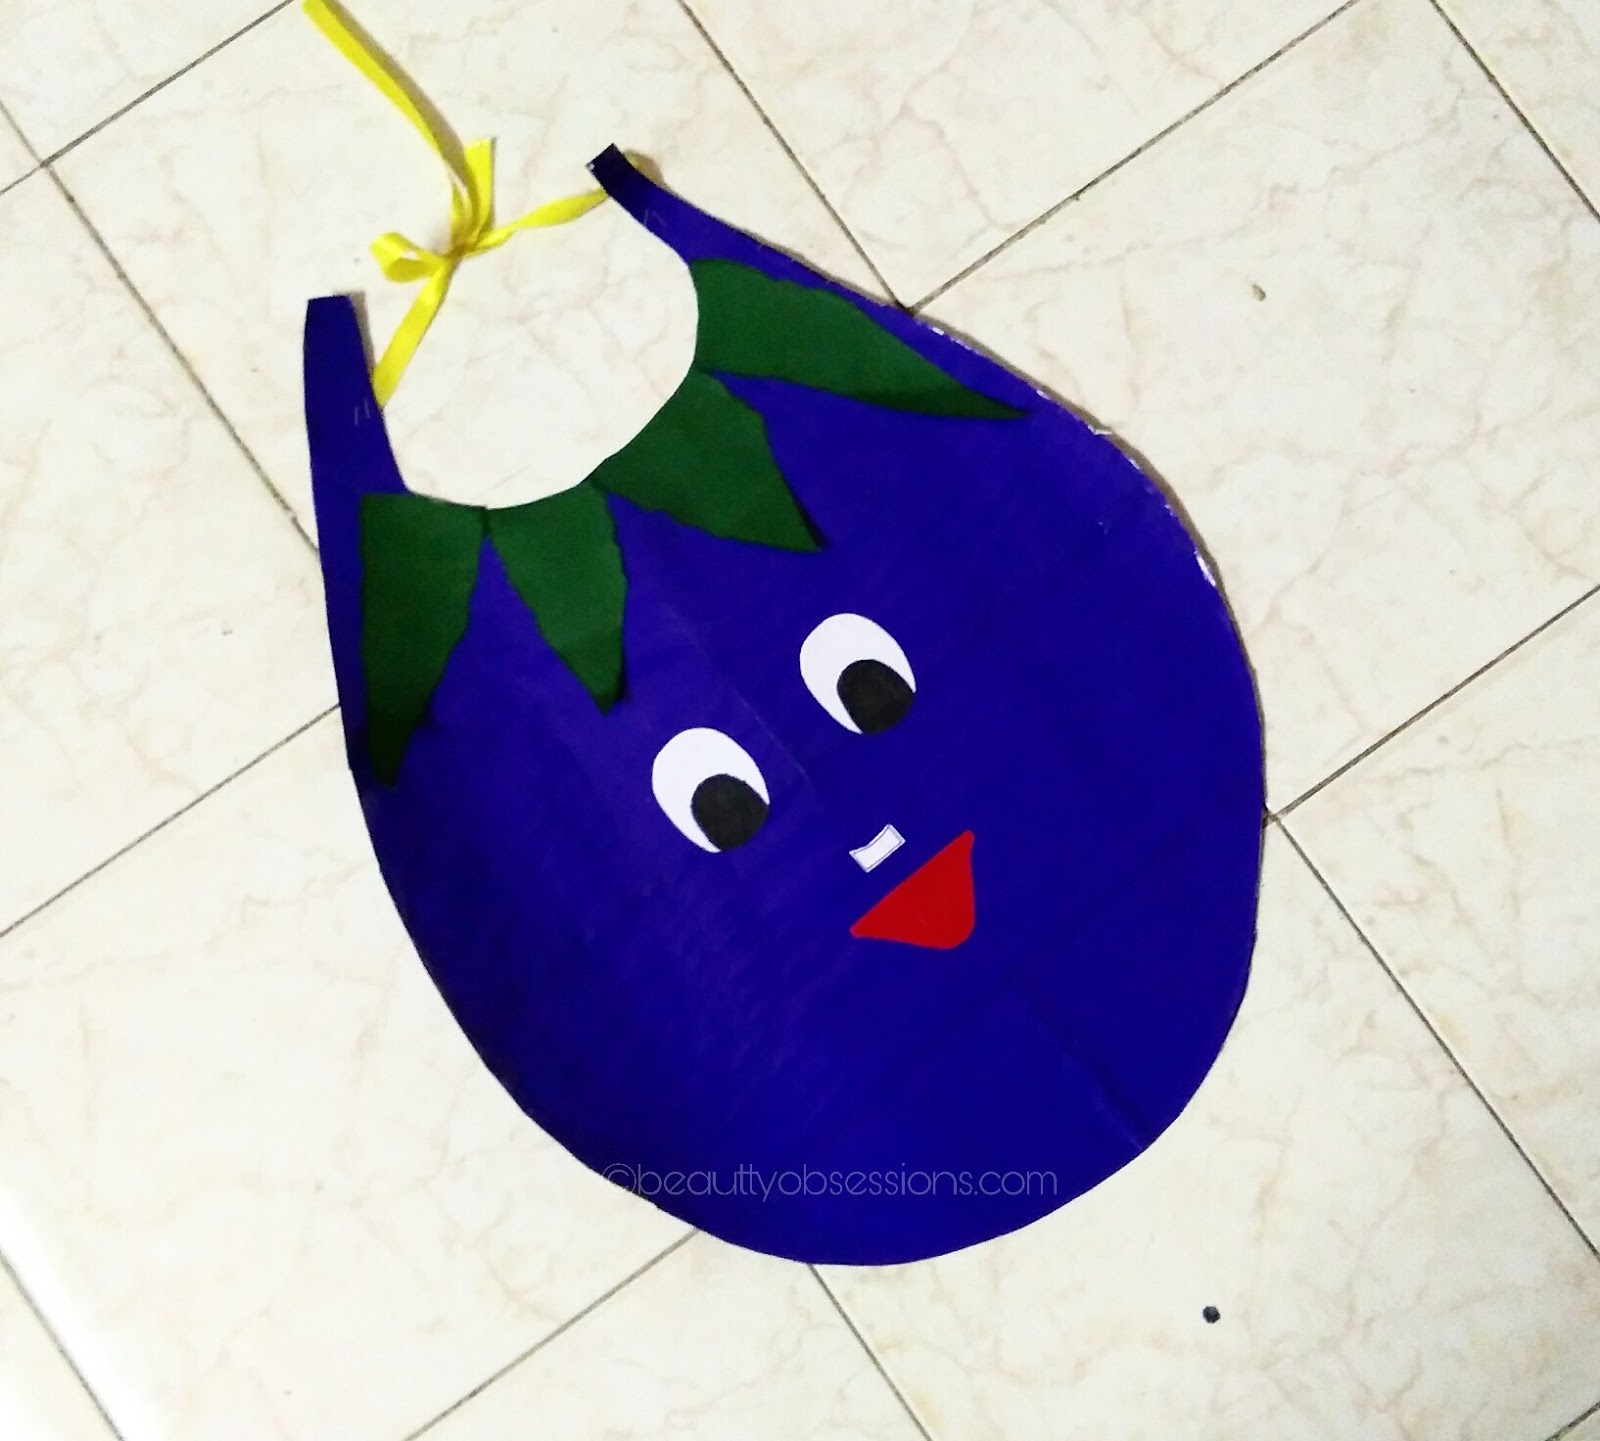 How To Make Brinjal With Chart Paper